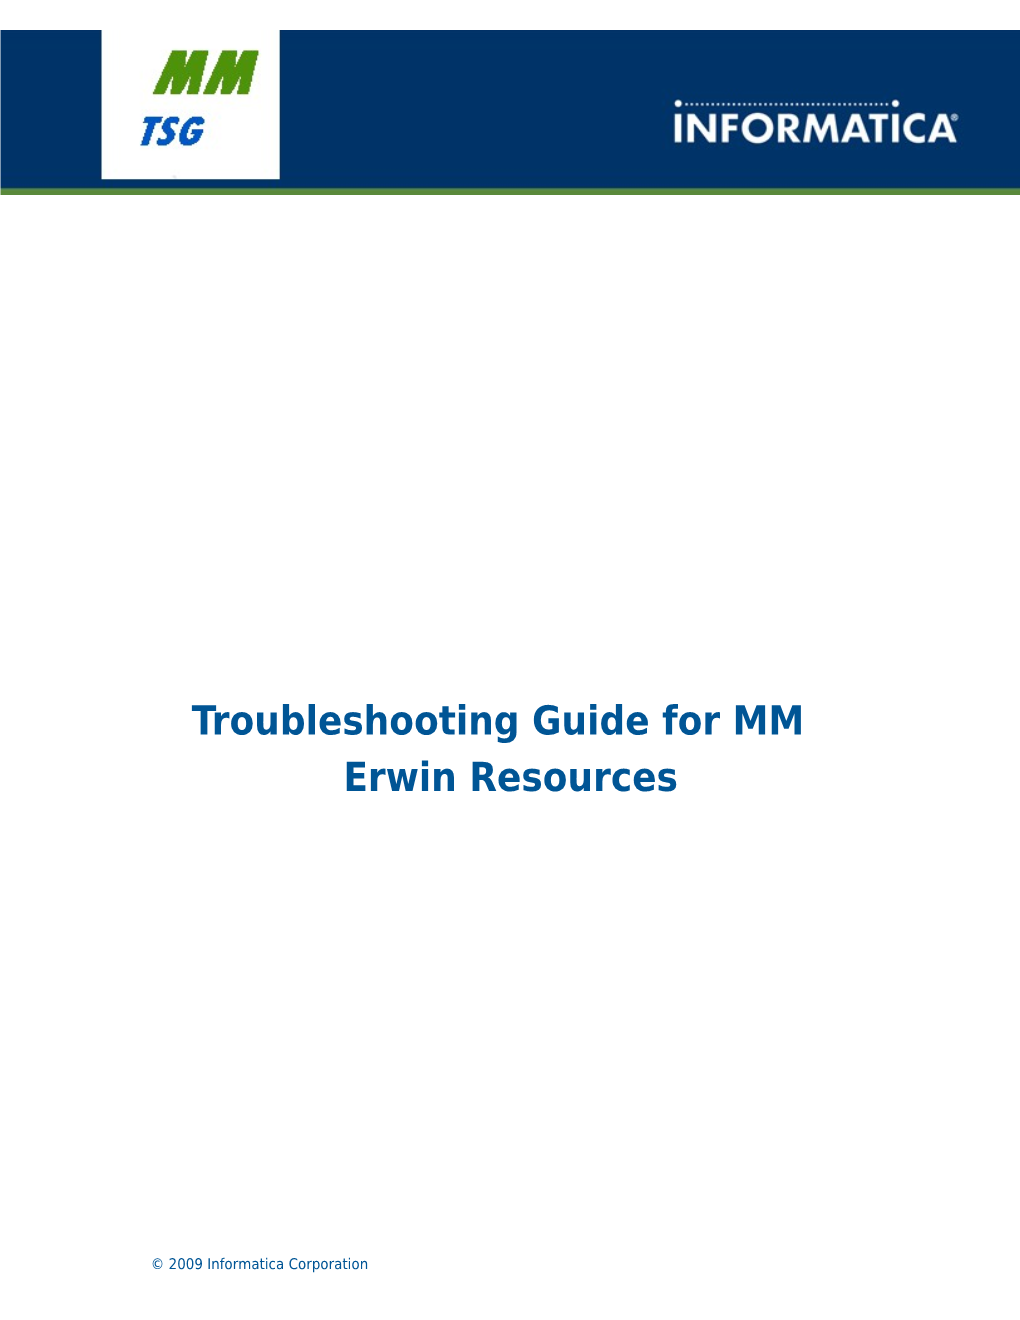 Troubleshooting Guide for MM